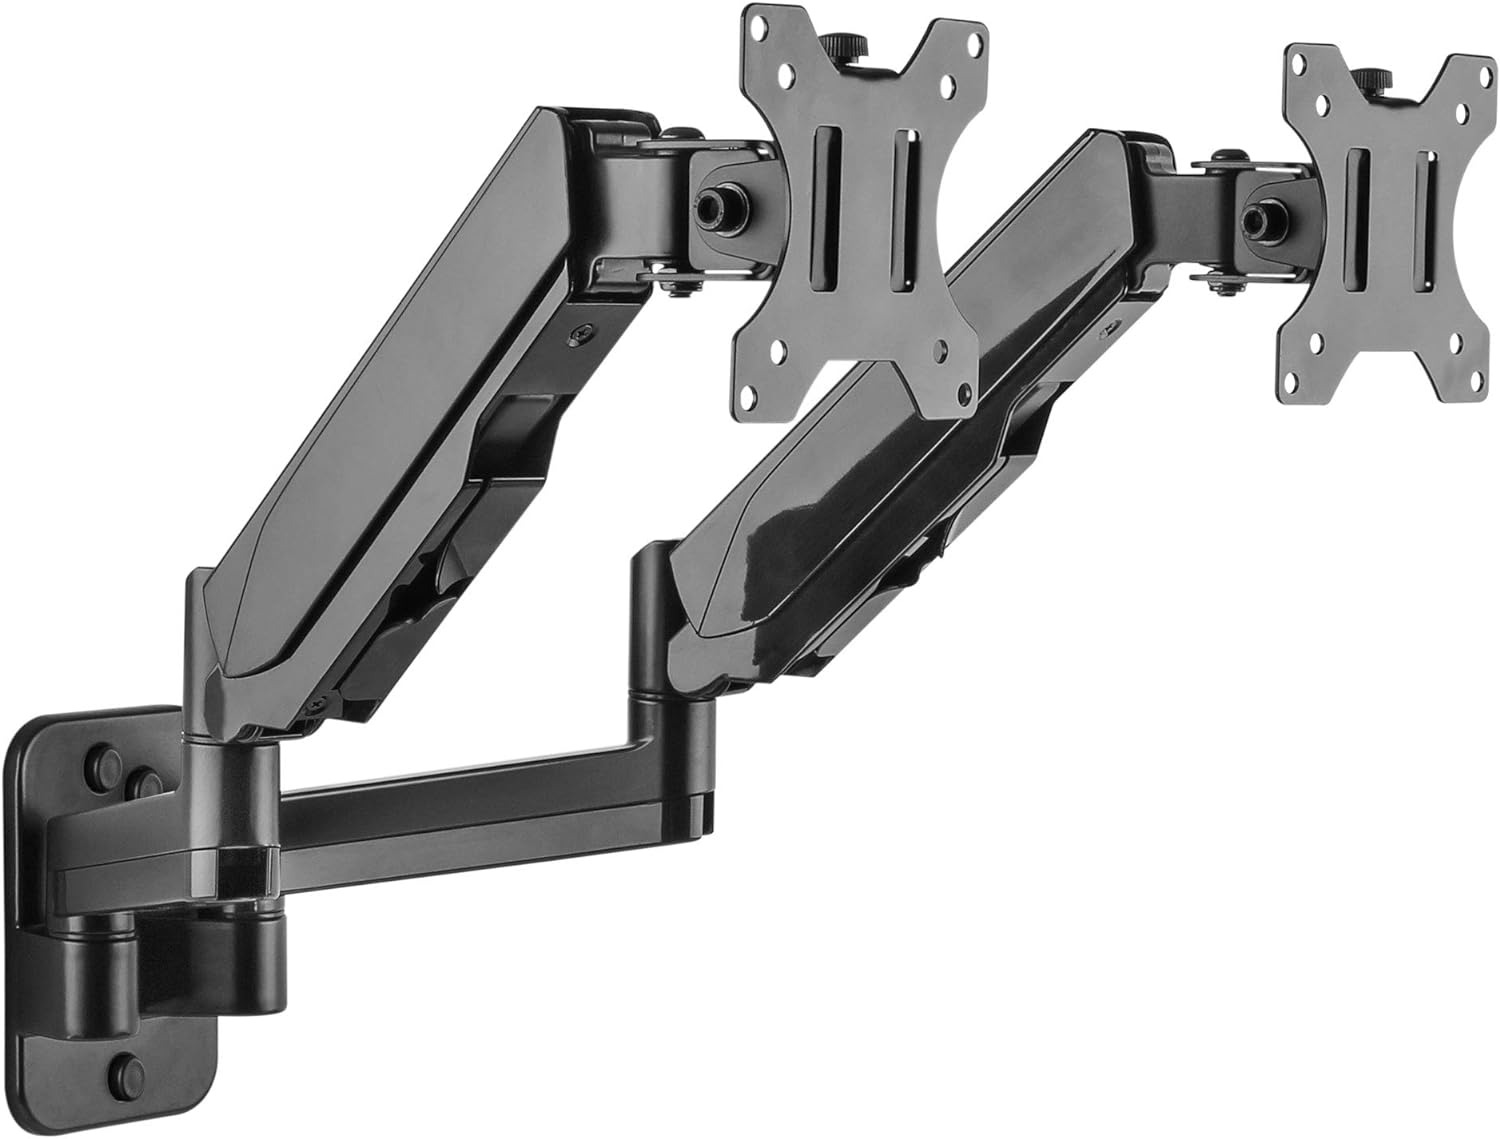 Mount-It Dual Monitor Wall Mount Bracket | Double With Clear